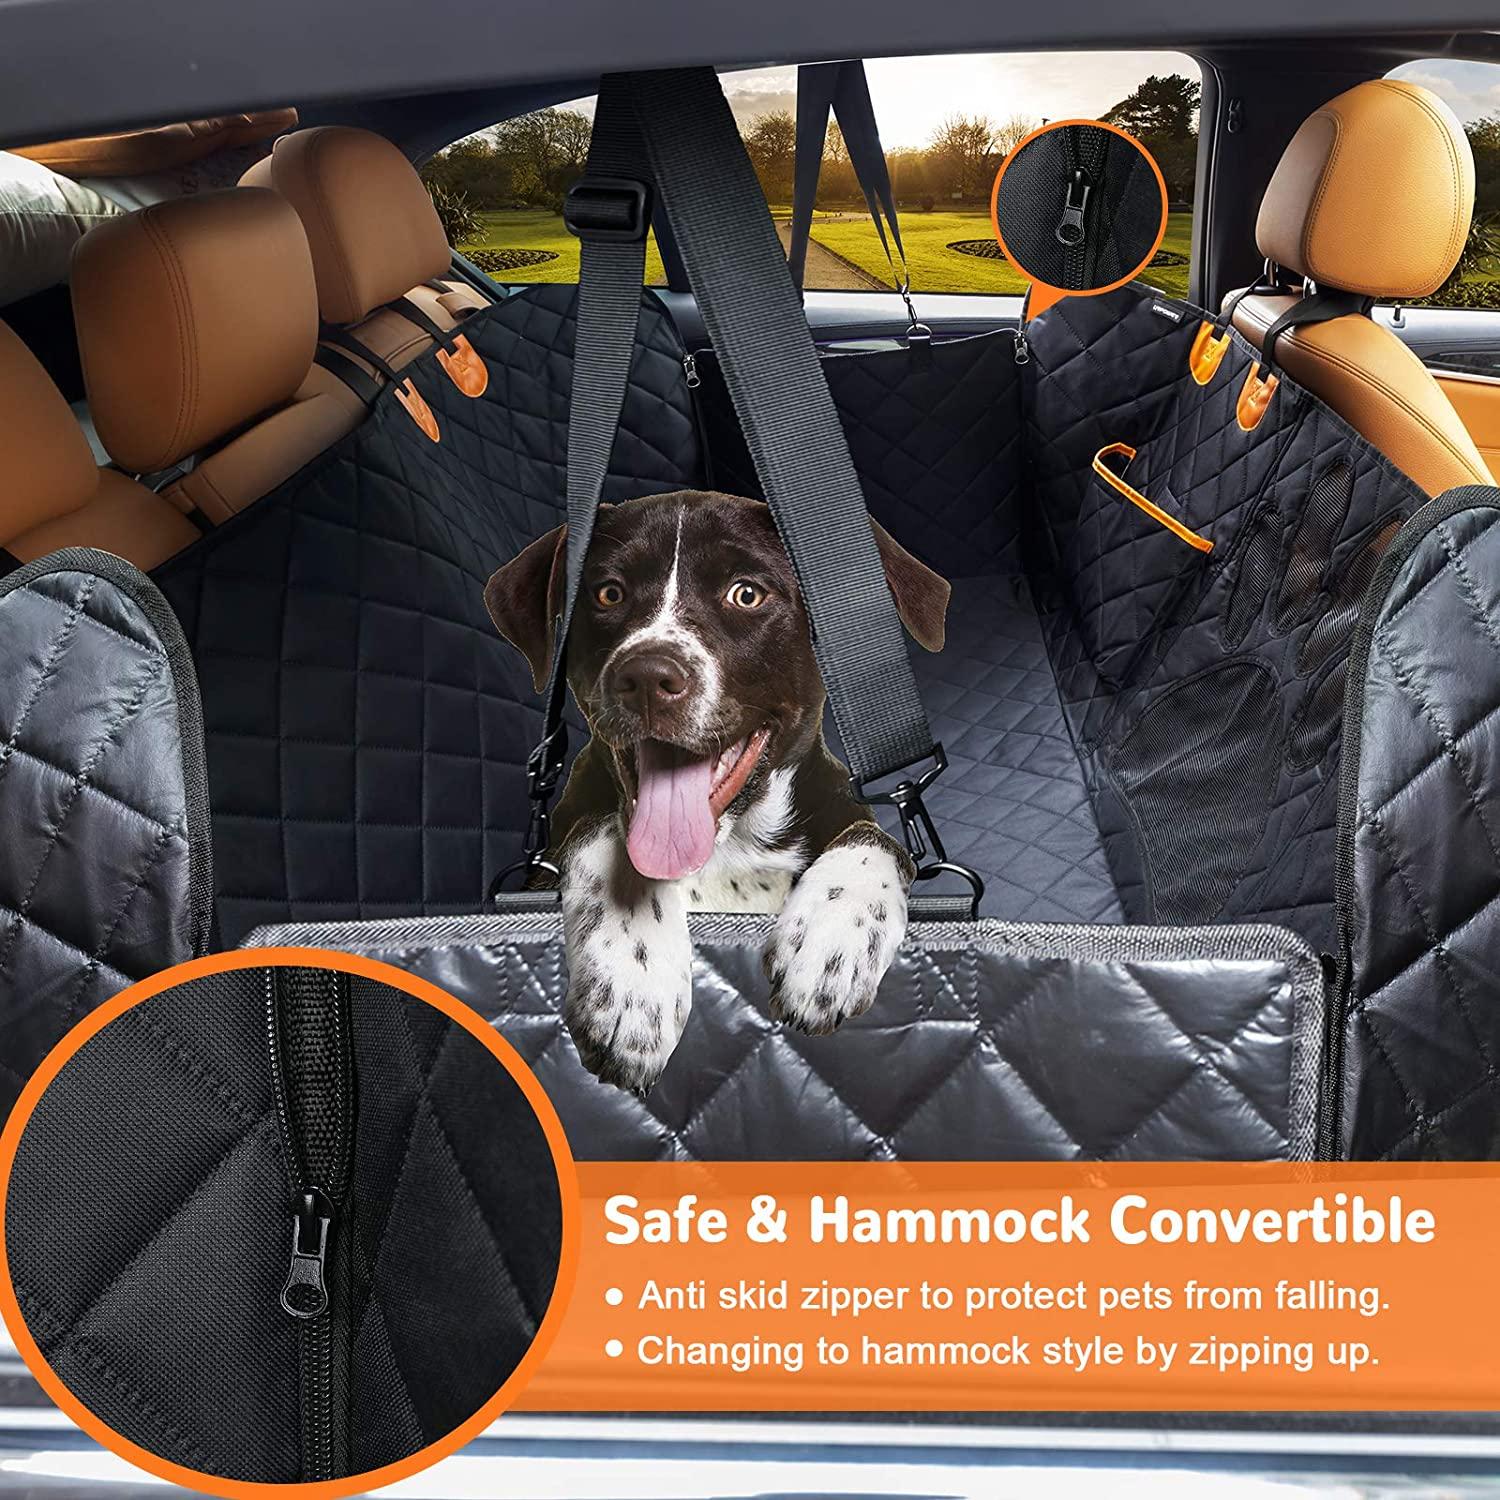 URPOWER Upgraded Dog Seat Covers with Mesh Visual Window 100